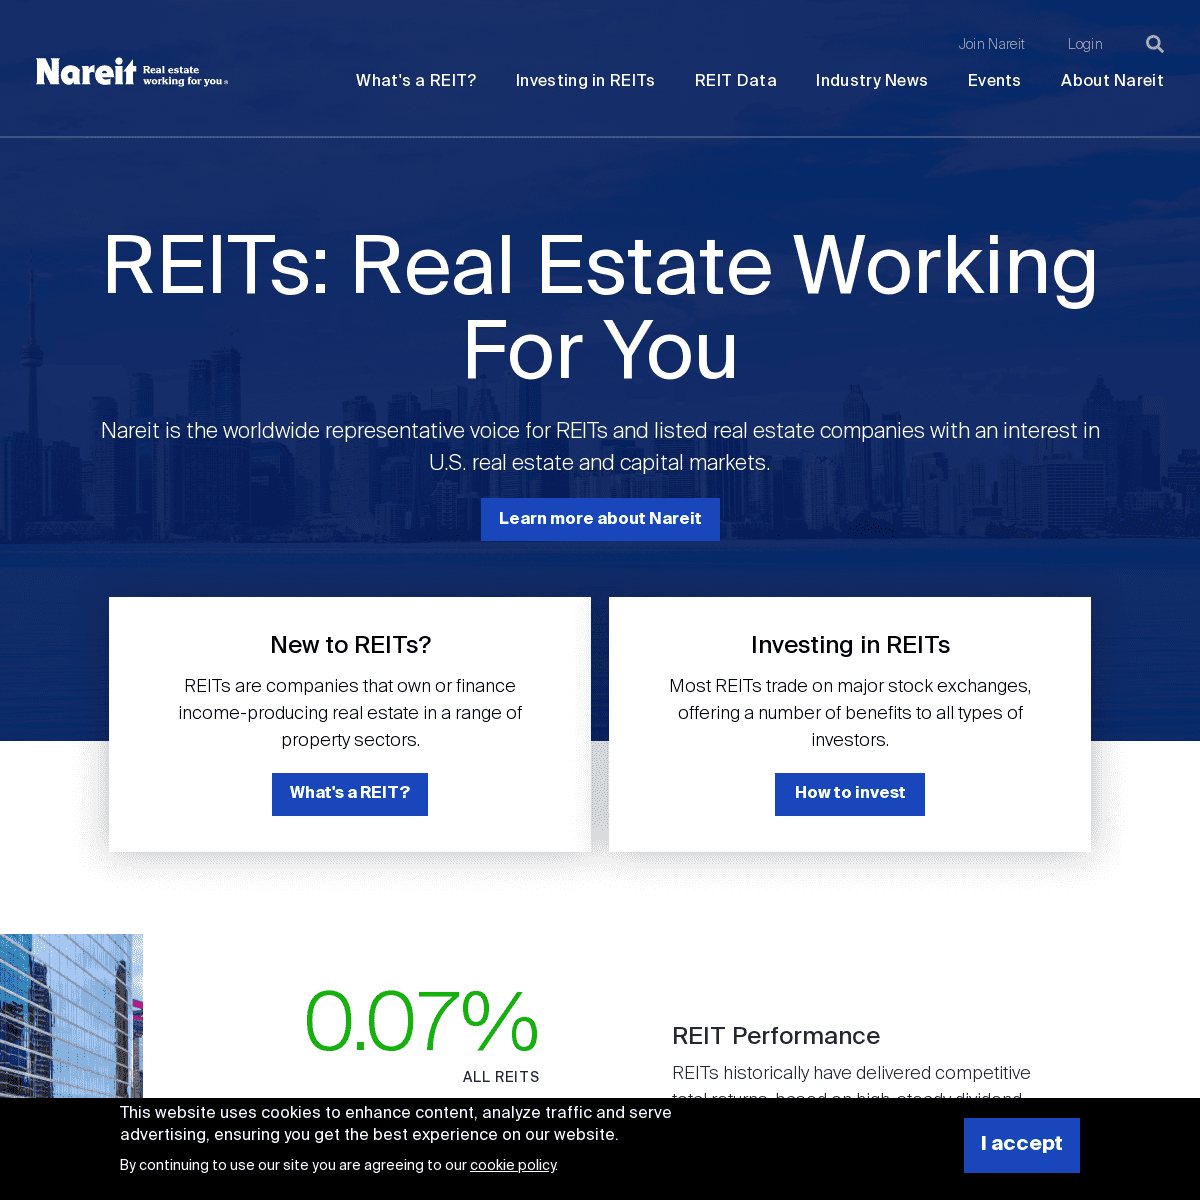 REITs and Real Estate Investing- Real Estate Working For You - Nareit